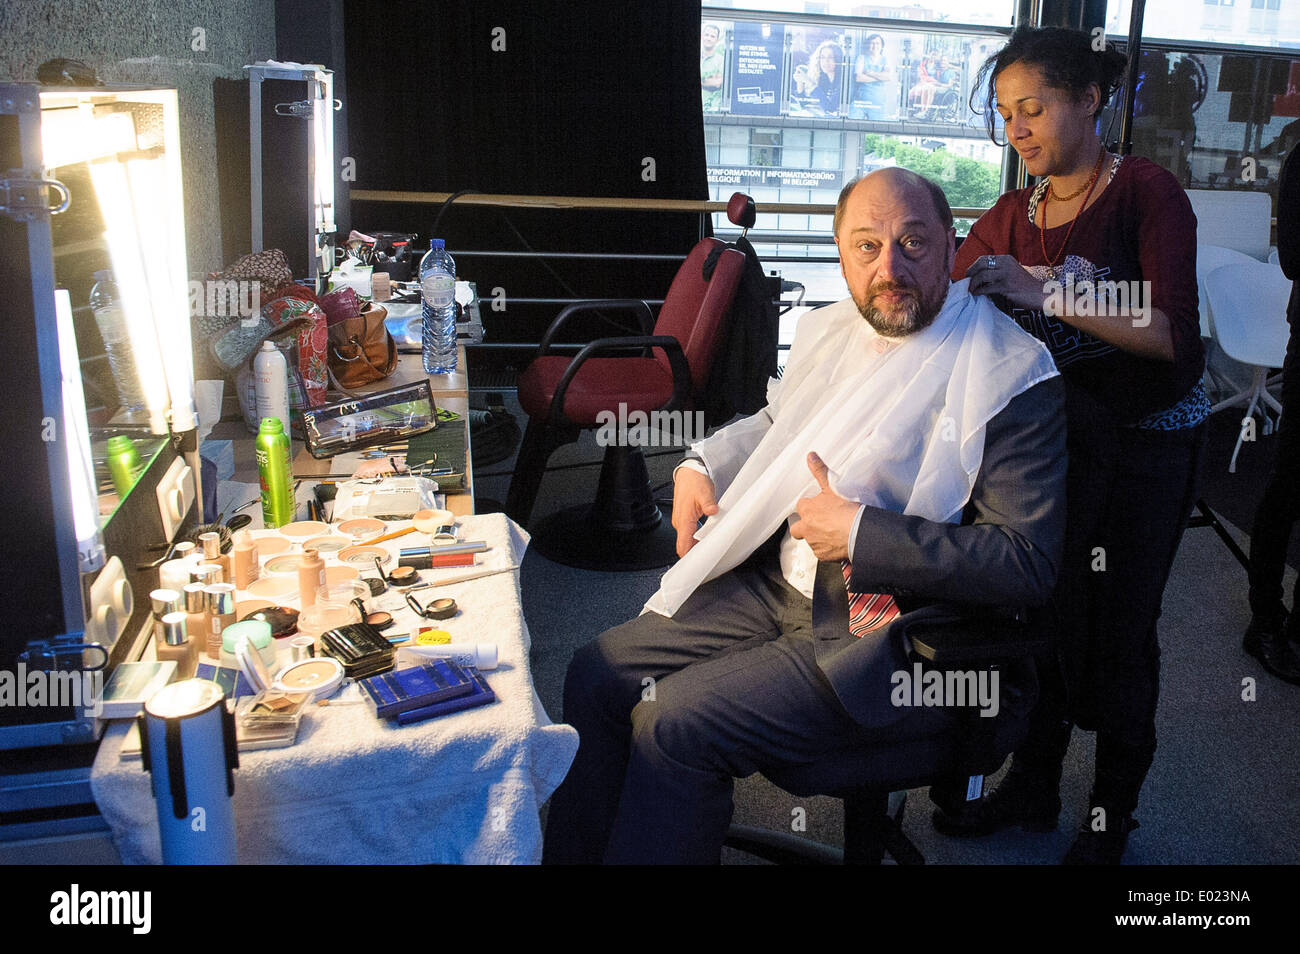 Brussels, Bxl, Belgium. 29th Apr, 2014. Martin Schulz, top candidate of the Party of European Socialists (PSE) for the upcoming European elections, receives the make-up ahead of Euranet's 'Big Crunch' Presidential debate at the EU parliament in Brussels, Belgium on 29.04.2014 The four top candidates for the presidency of the European Commission - Jean-Claude Juncker, Ska Keller, Martin Schulz and Guy Verhofstadt - attend EU-wide debate organized by EuranetPlus and focused on the major election topics. by Wiktor Dabkowski Credit:  Wiktor Dabkowski/ZUMAPRESS.com/Alamy Live News Stock Photo